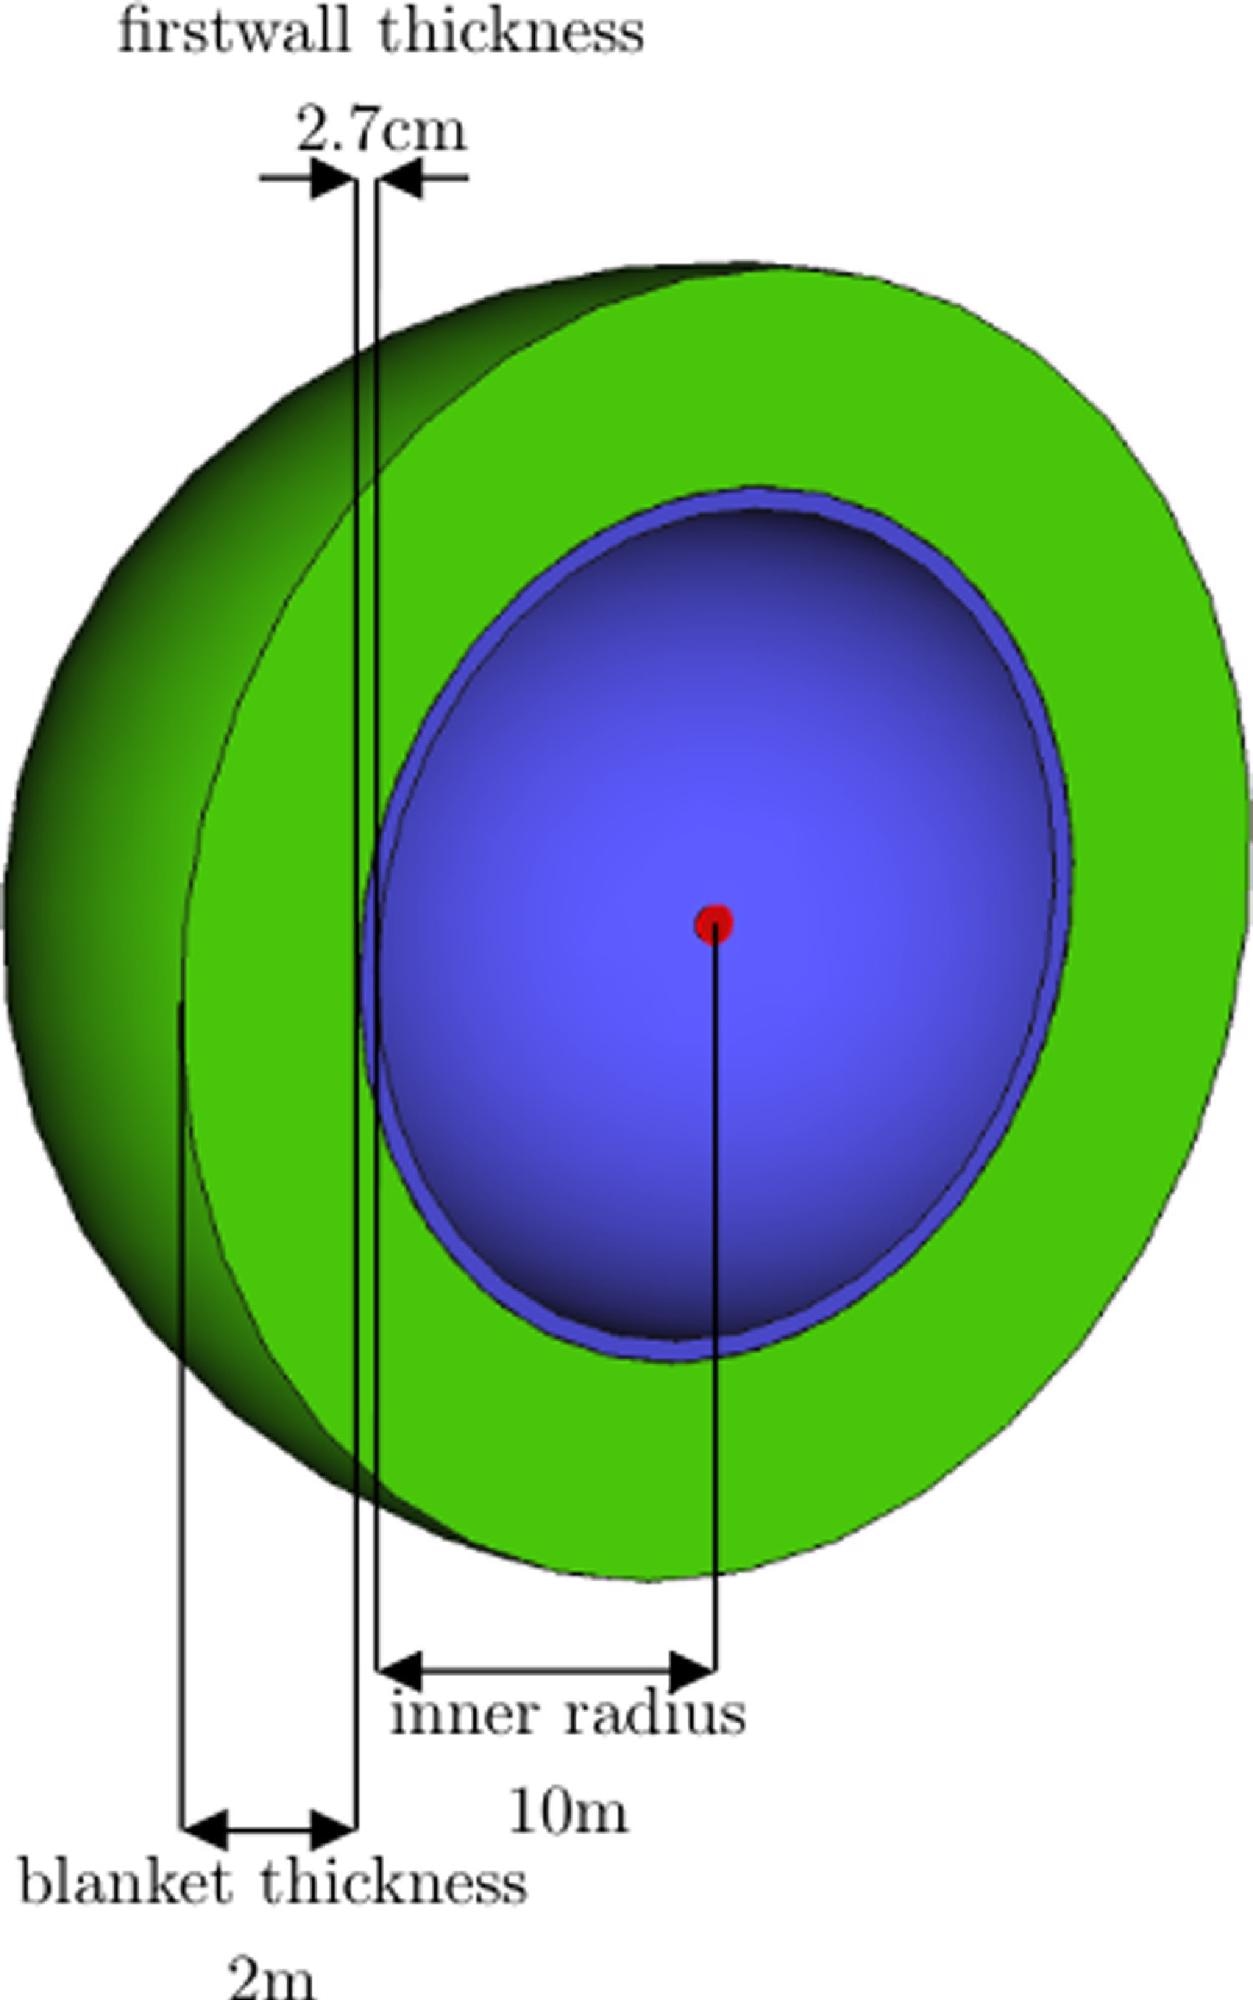 Cross-section of the simple sphere geometry (not to scale) where the breeder blanket (outer sphere), surrounds the first wall (inner circle) and is separated from the neutron point source (middle circle) by a vacuum.